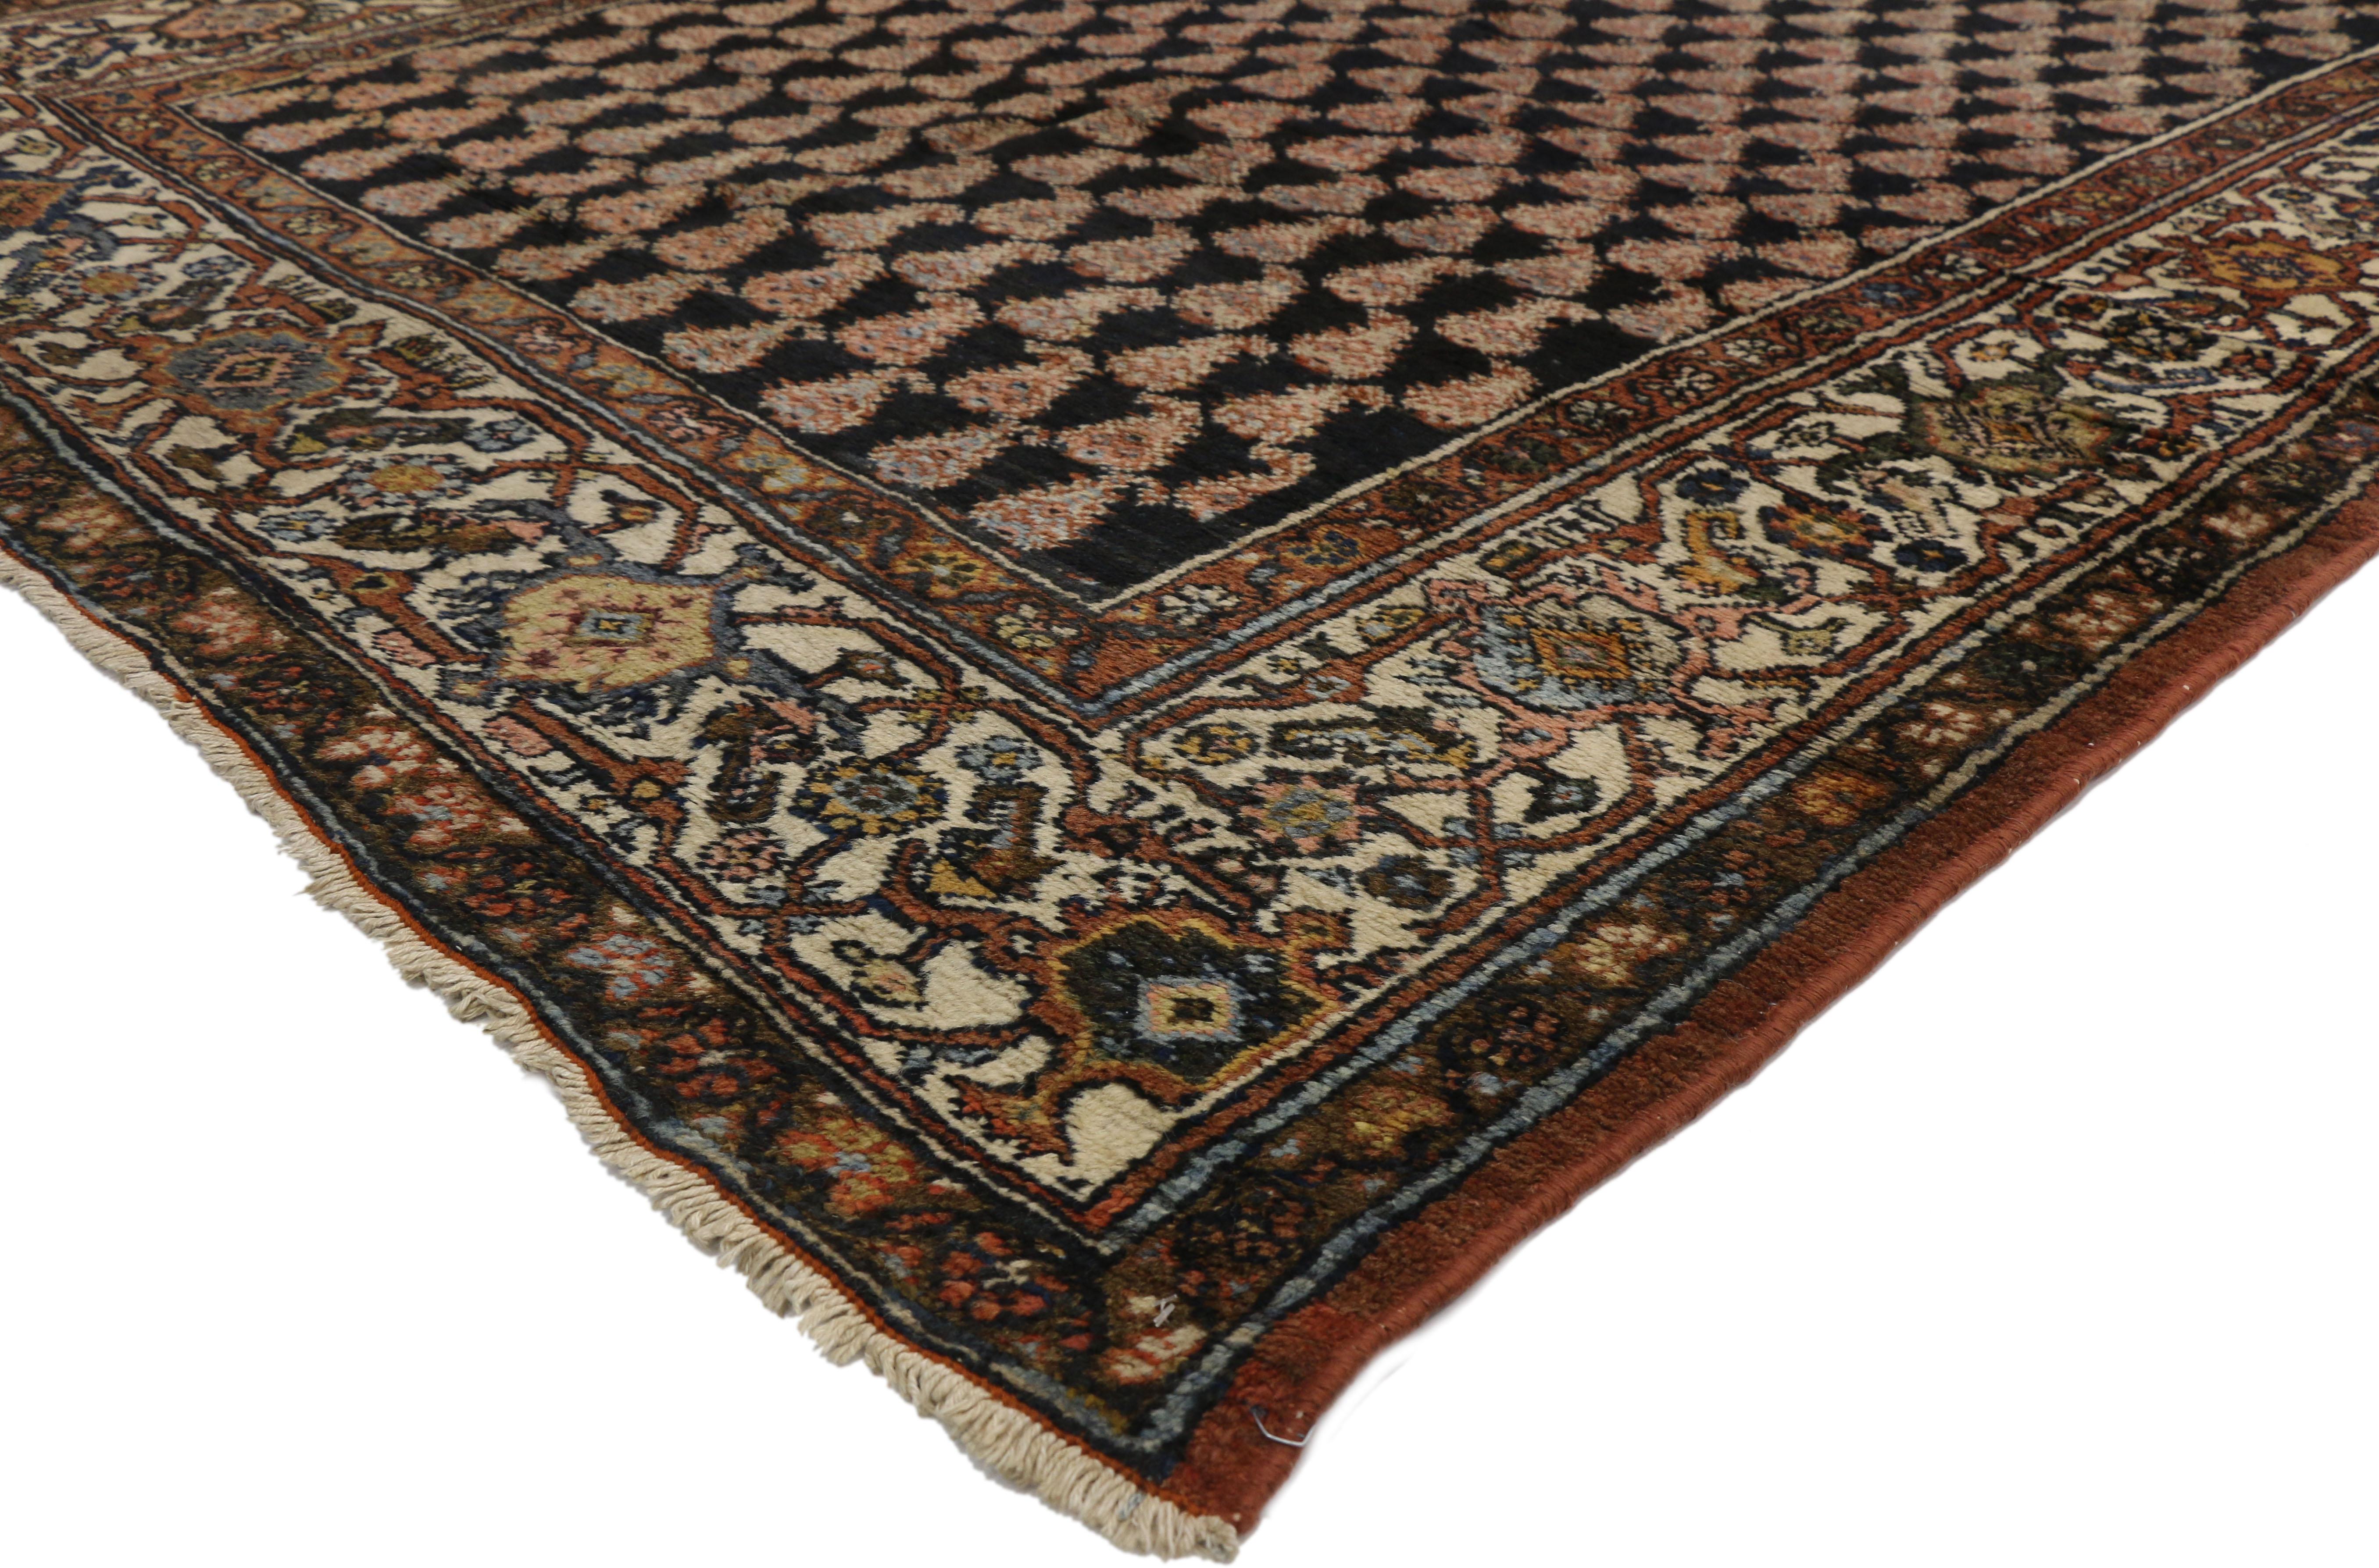 72510 Antique Persian Malayer gallery rug with traditional style and raconteur vibes. Stately and elegant, this hand knotted wool antique Persian Malayer gallery rug features an all-over boteh pattern against a midnight ink blue backdrop. The boteh